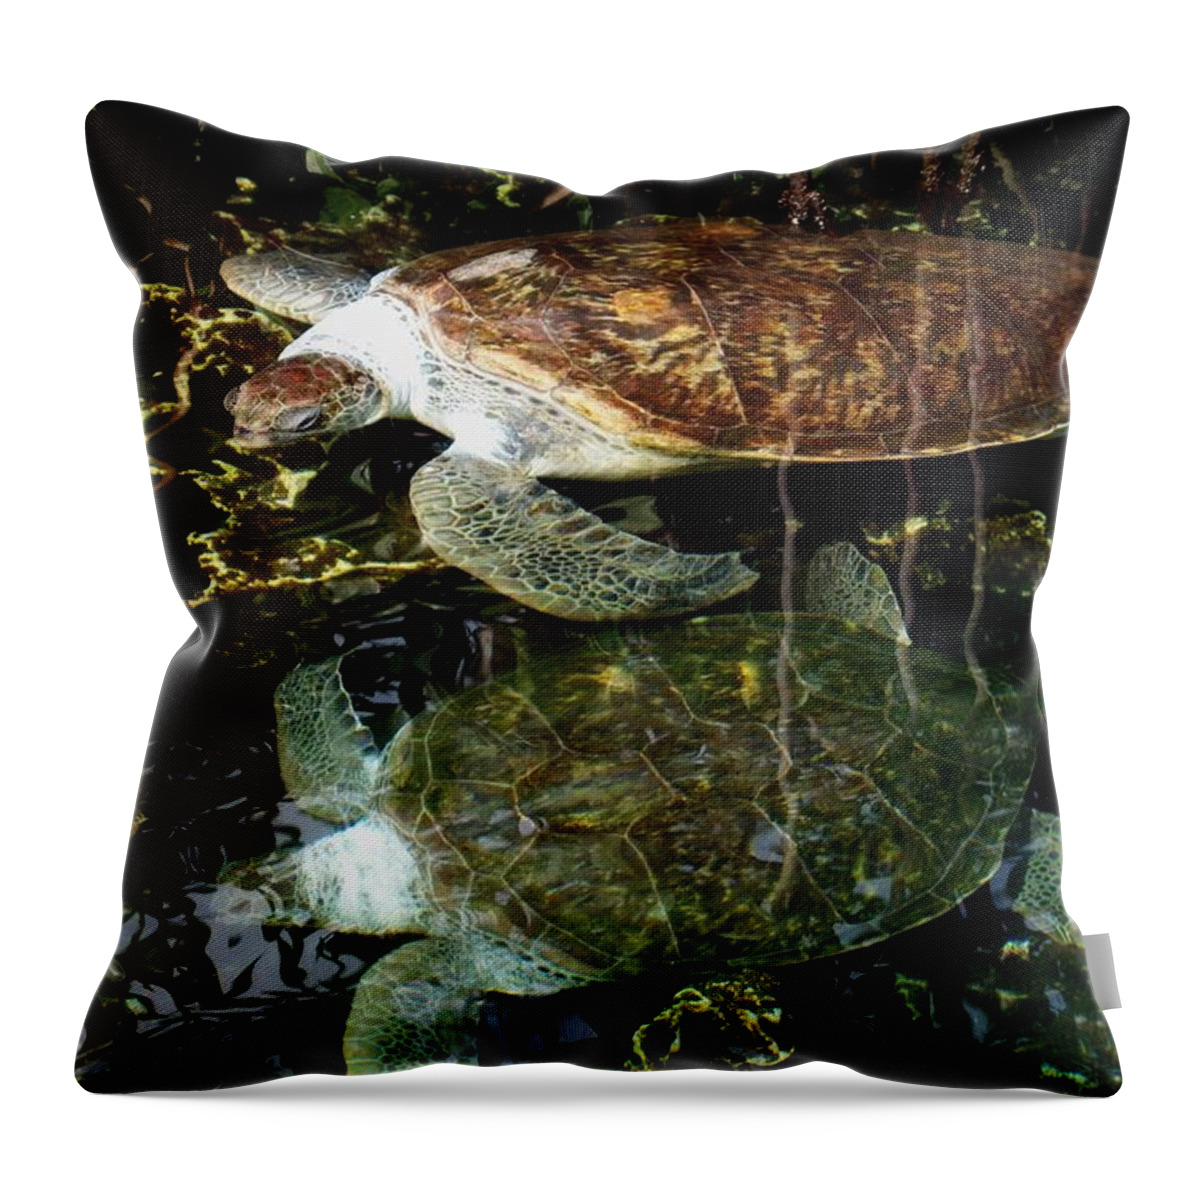 Turtle Throw Pillow featuring the photograph Turtles by Angela Murray